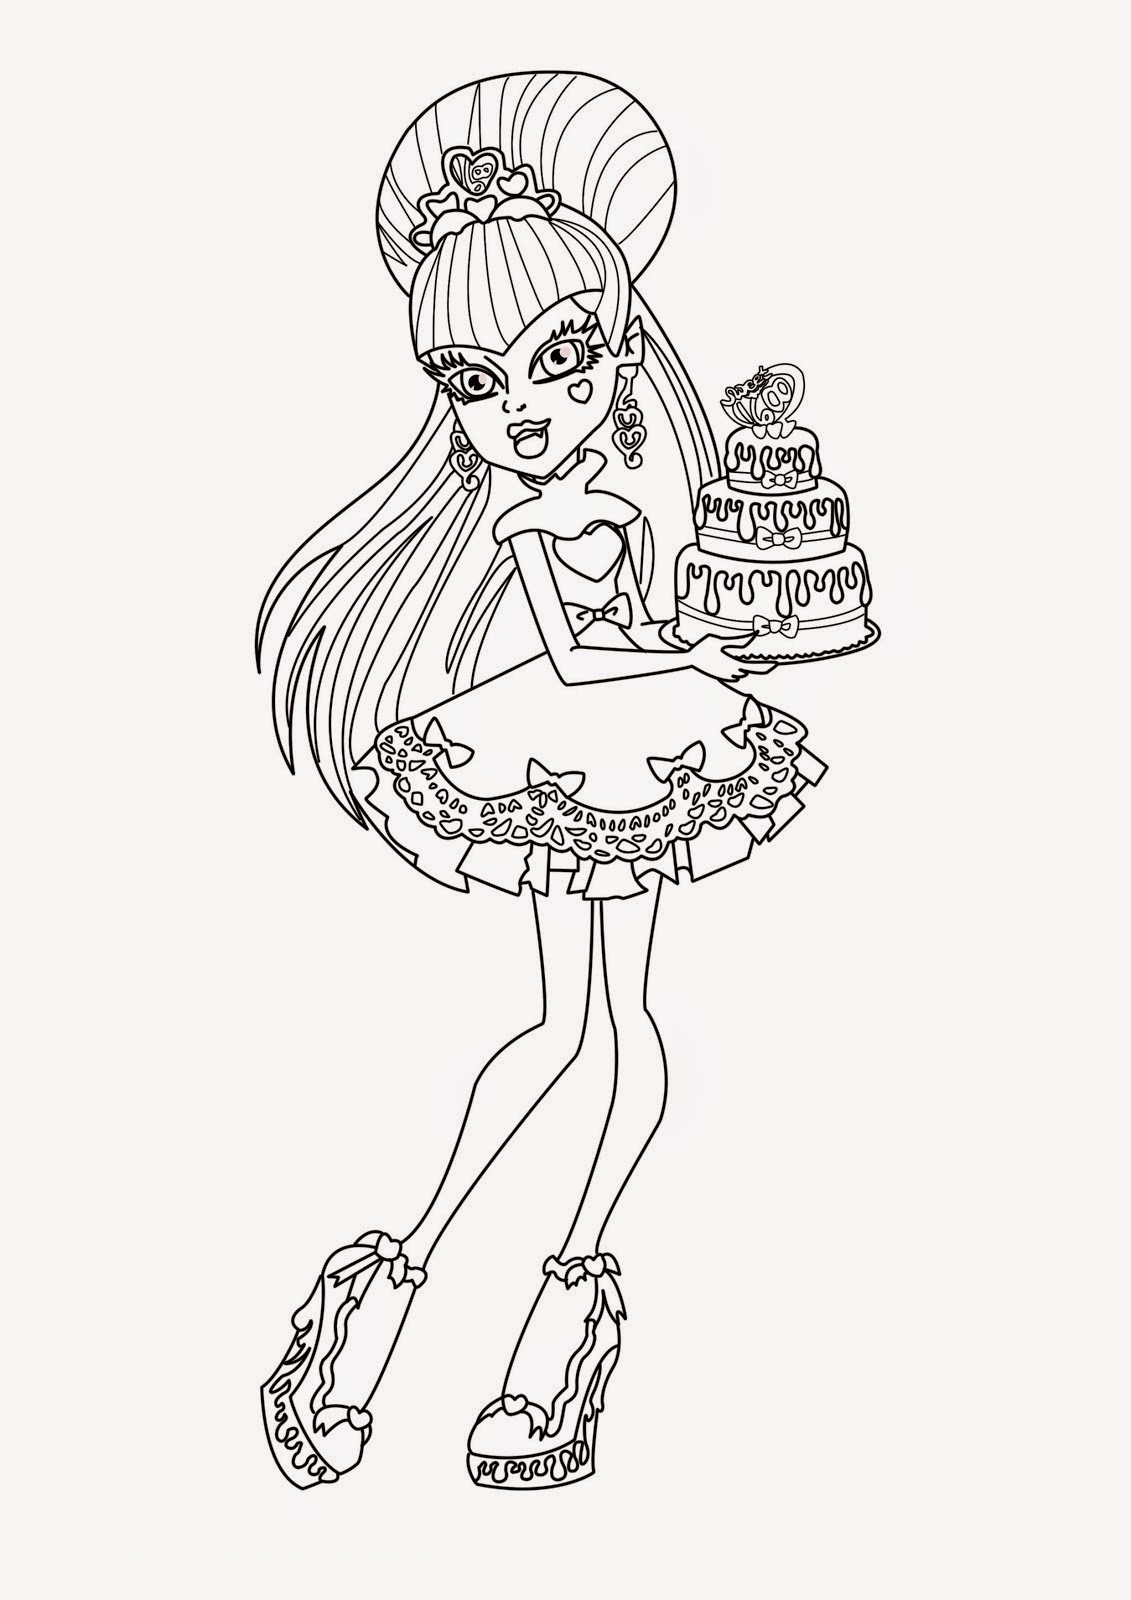 Monster High coloring pages coloring.filminspector.com